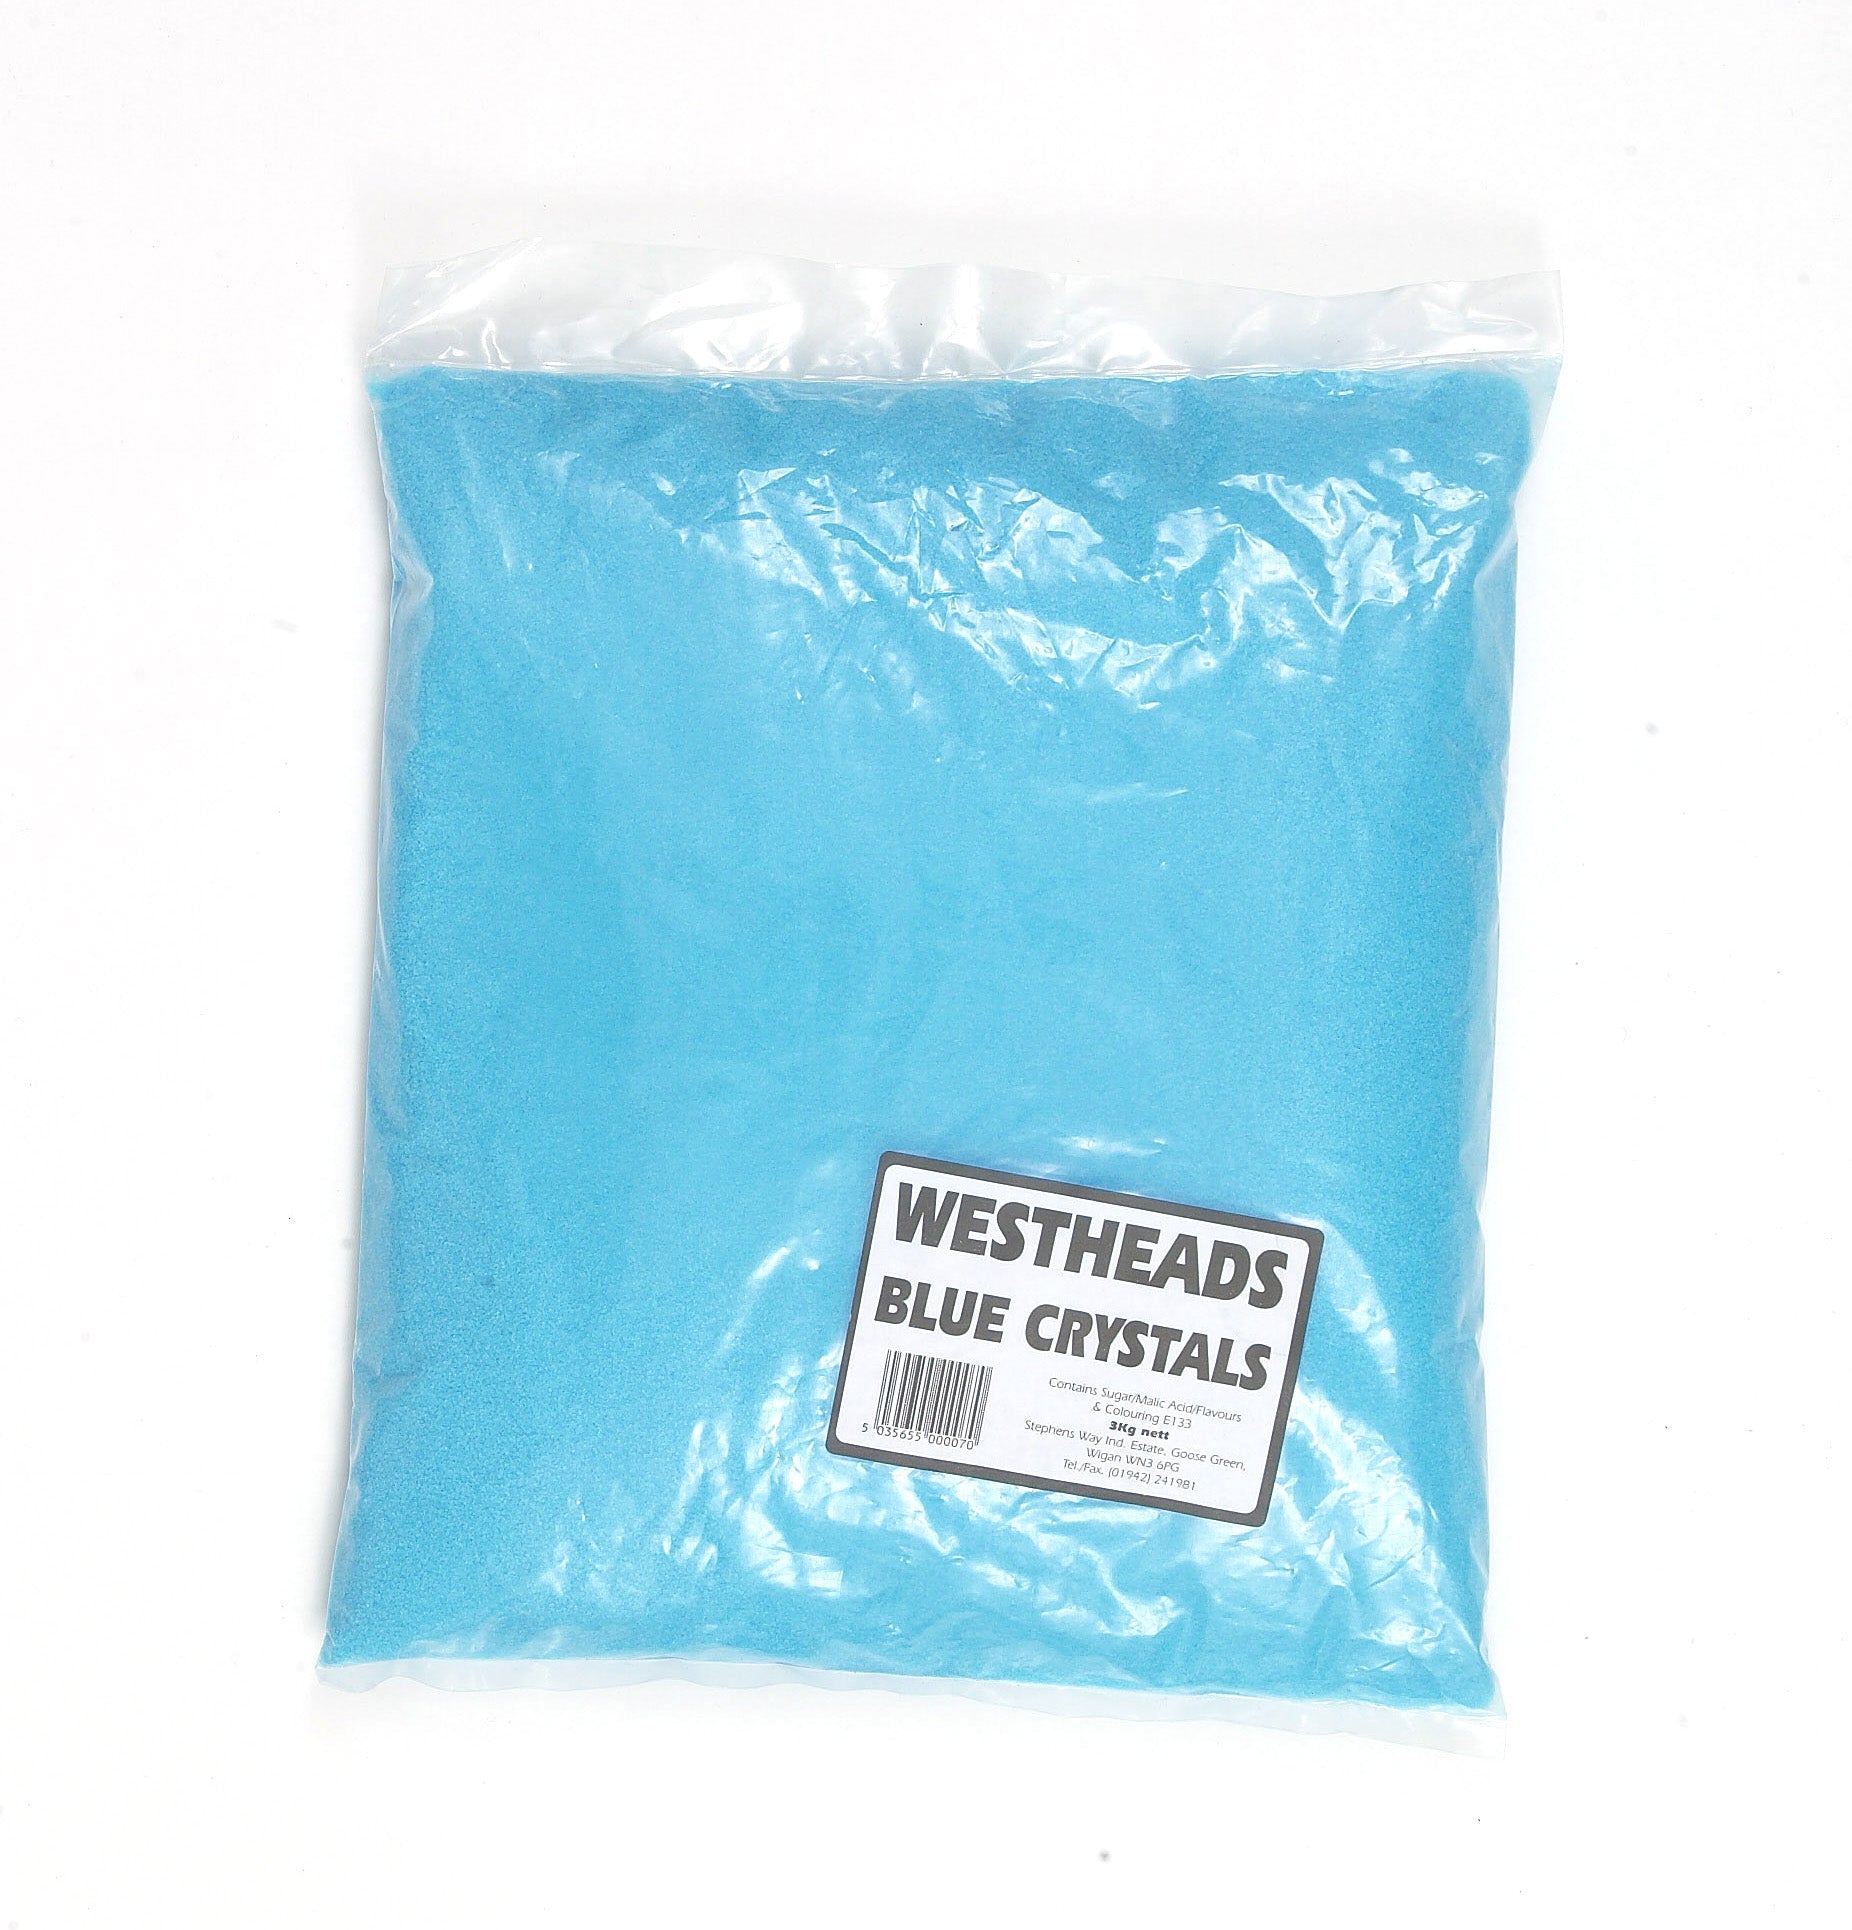 Westhead's Blue Crystals 3kg